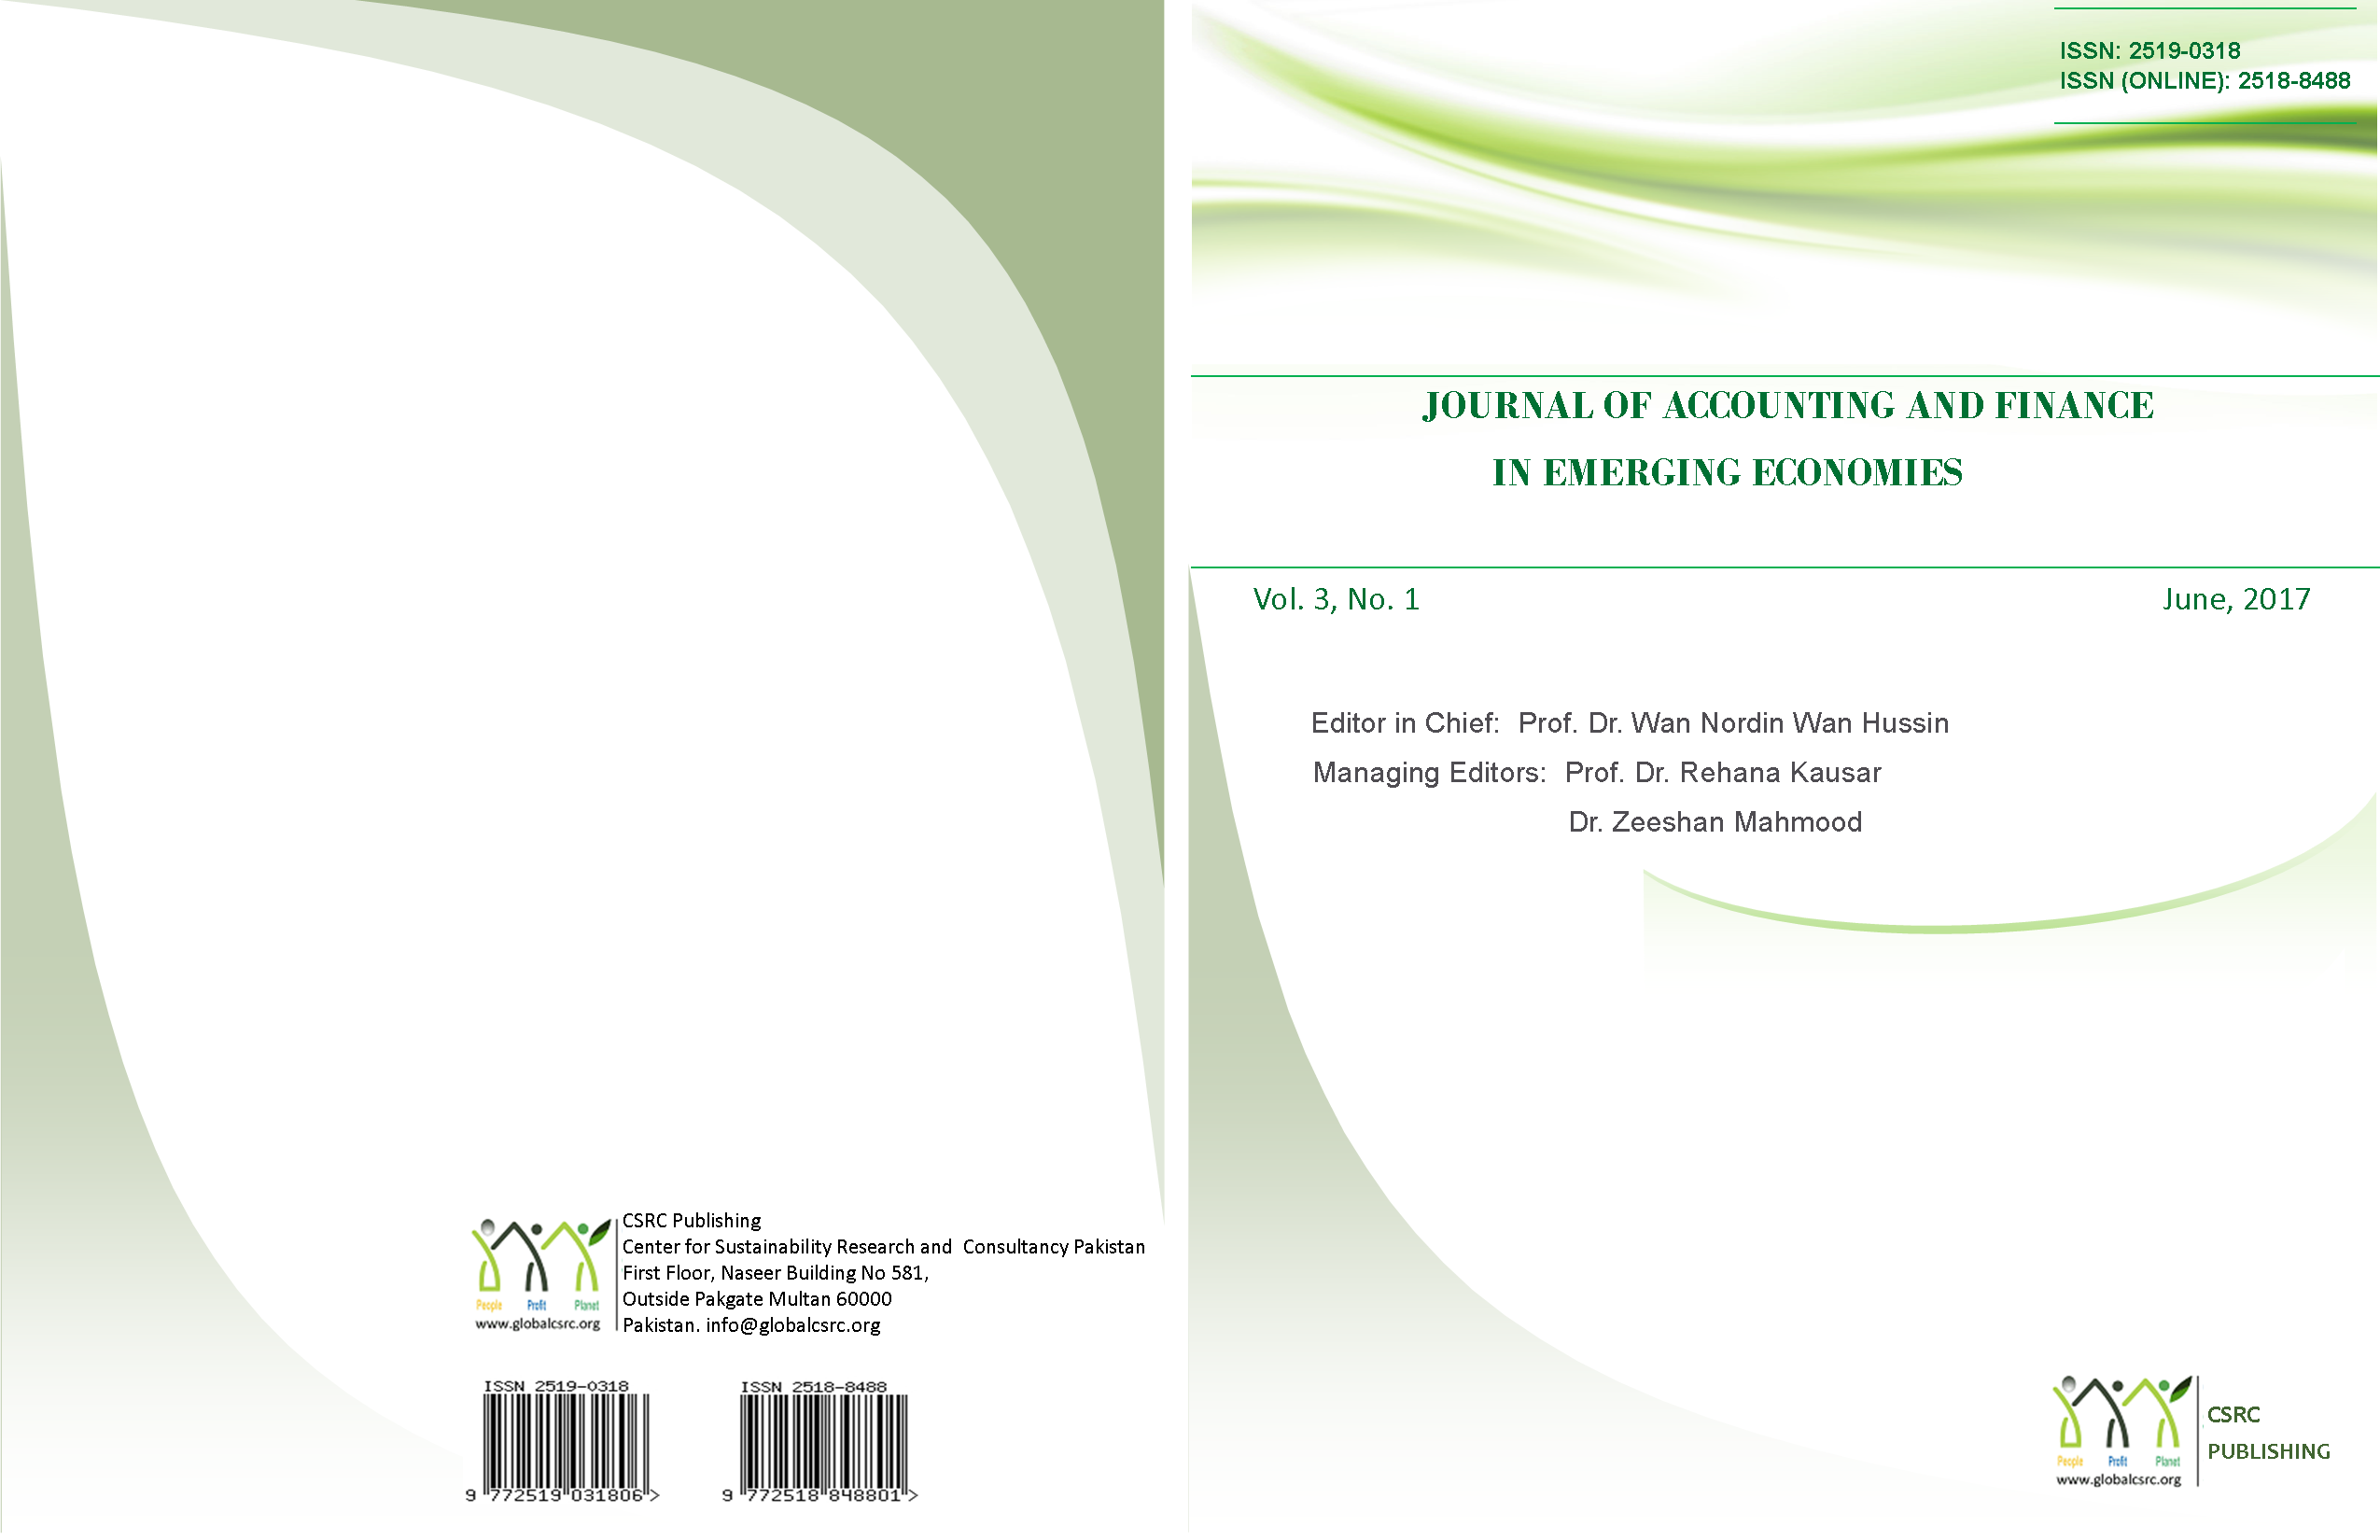 Journal of Accounting and Finance in Emerging Economies. Vol 3. Issue 1, June 2017